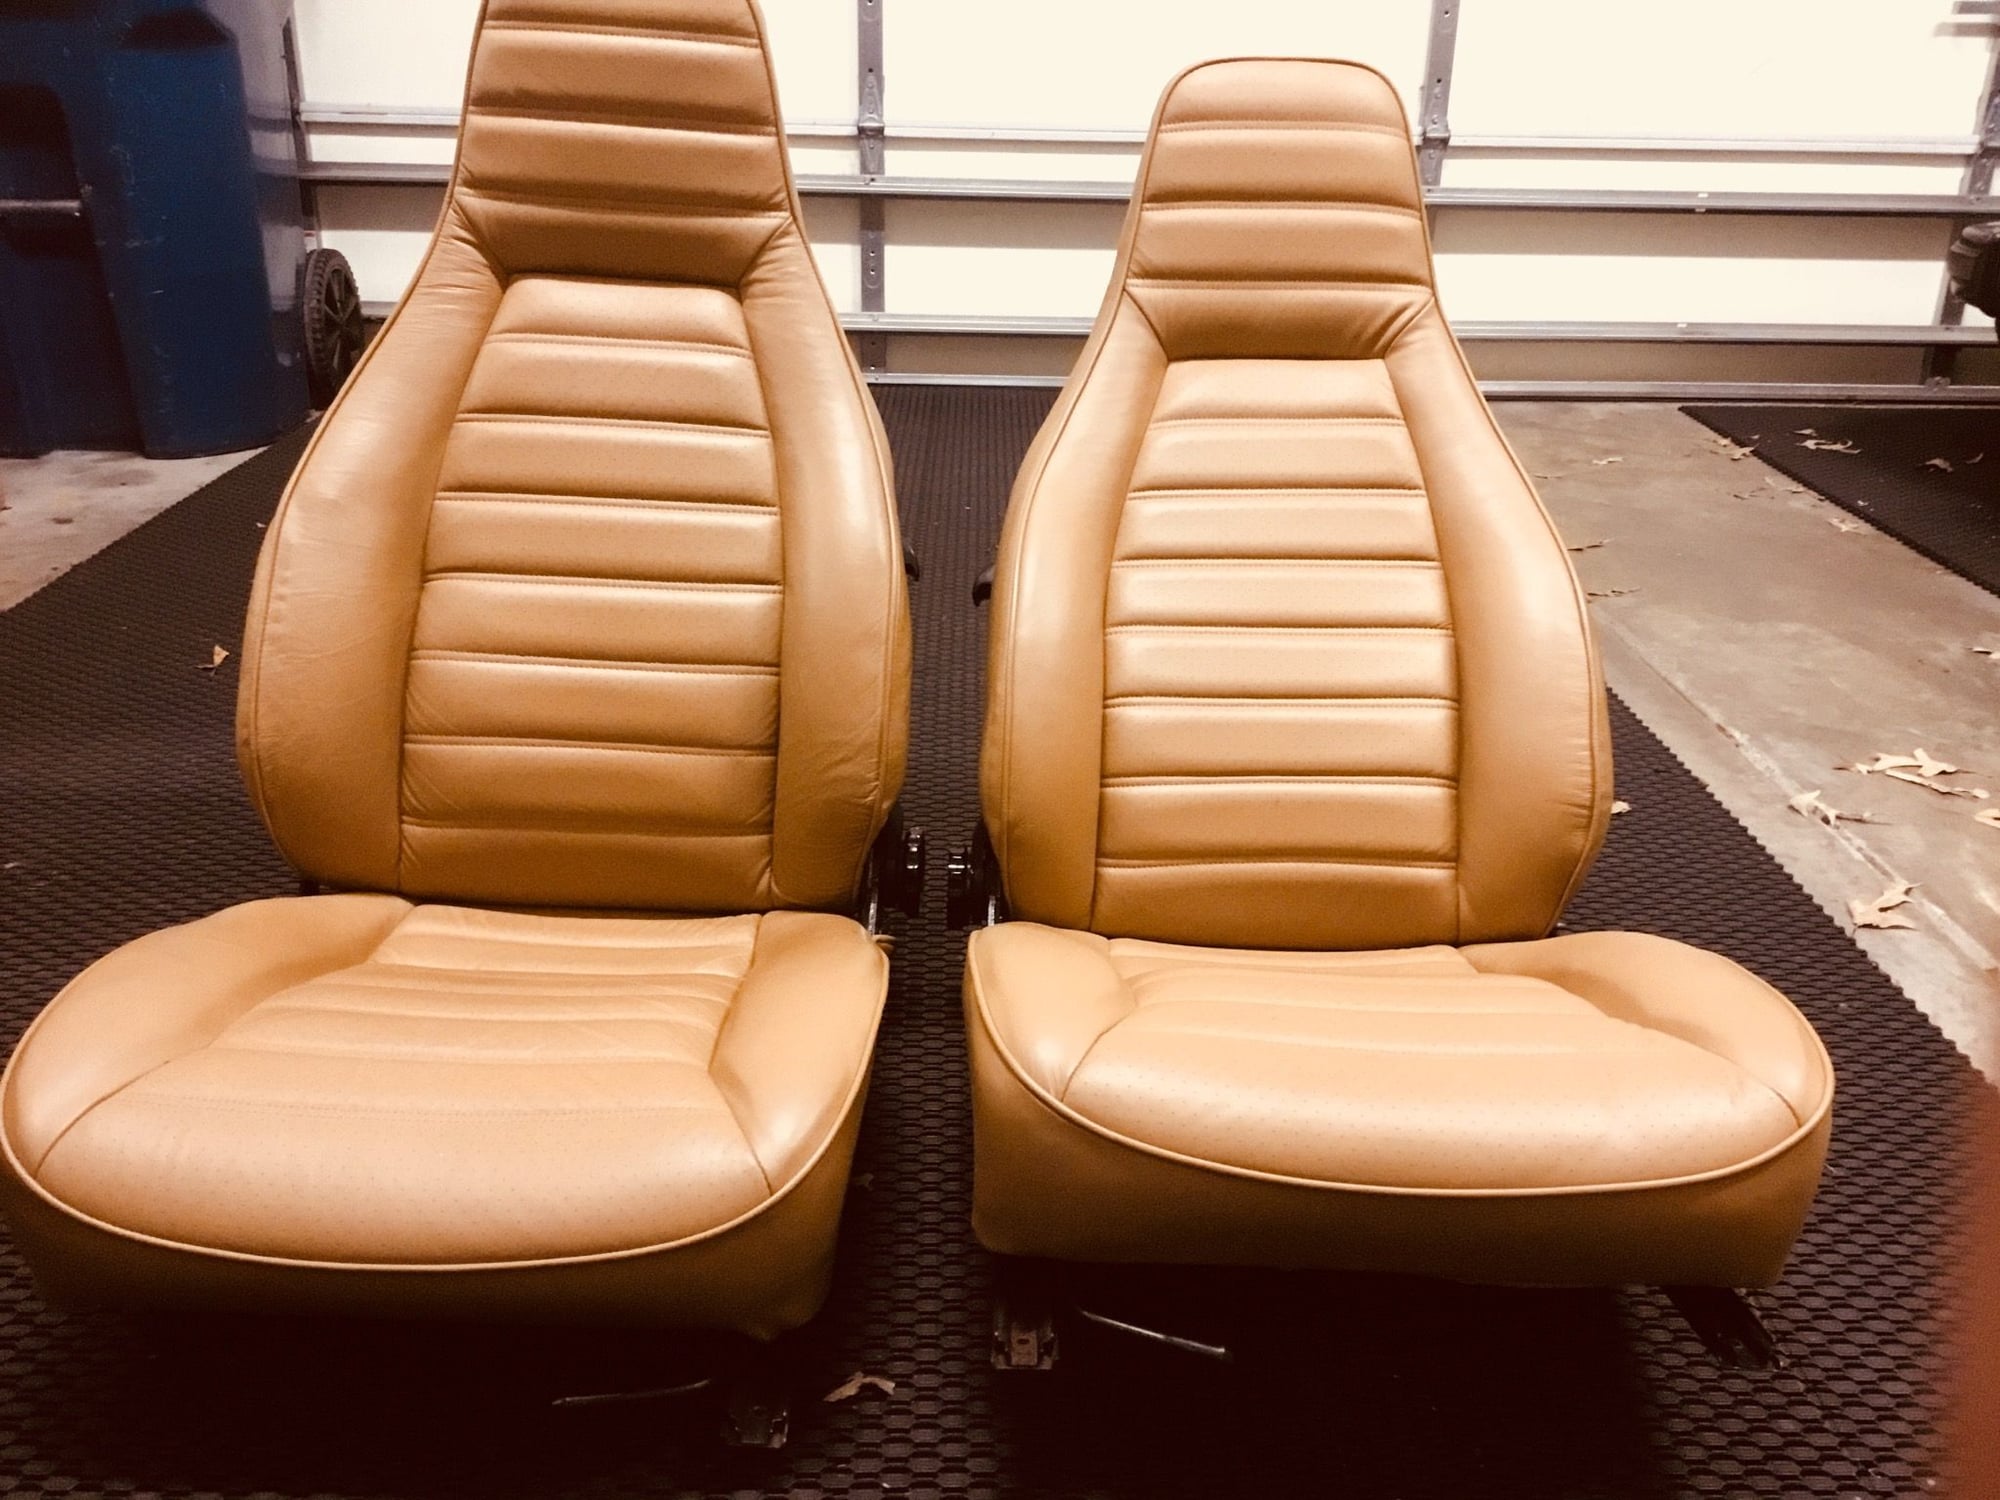 Interior/Upholstery - Porsche SC Seats - Used - 1974 to 1989 Porsche 911 - Marvin, NC 28173, United States